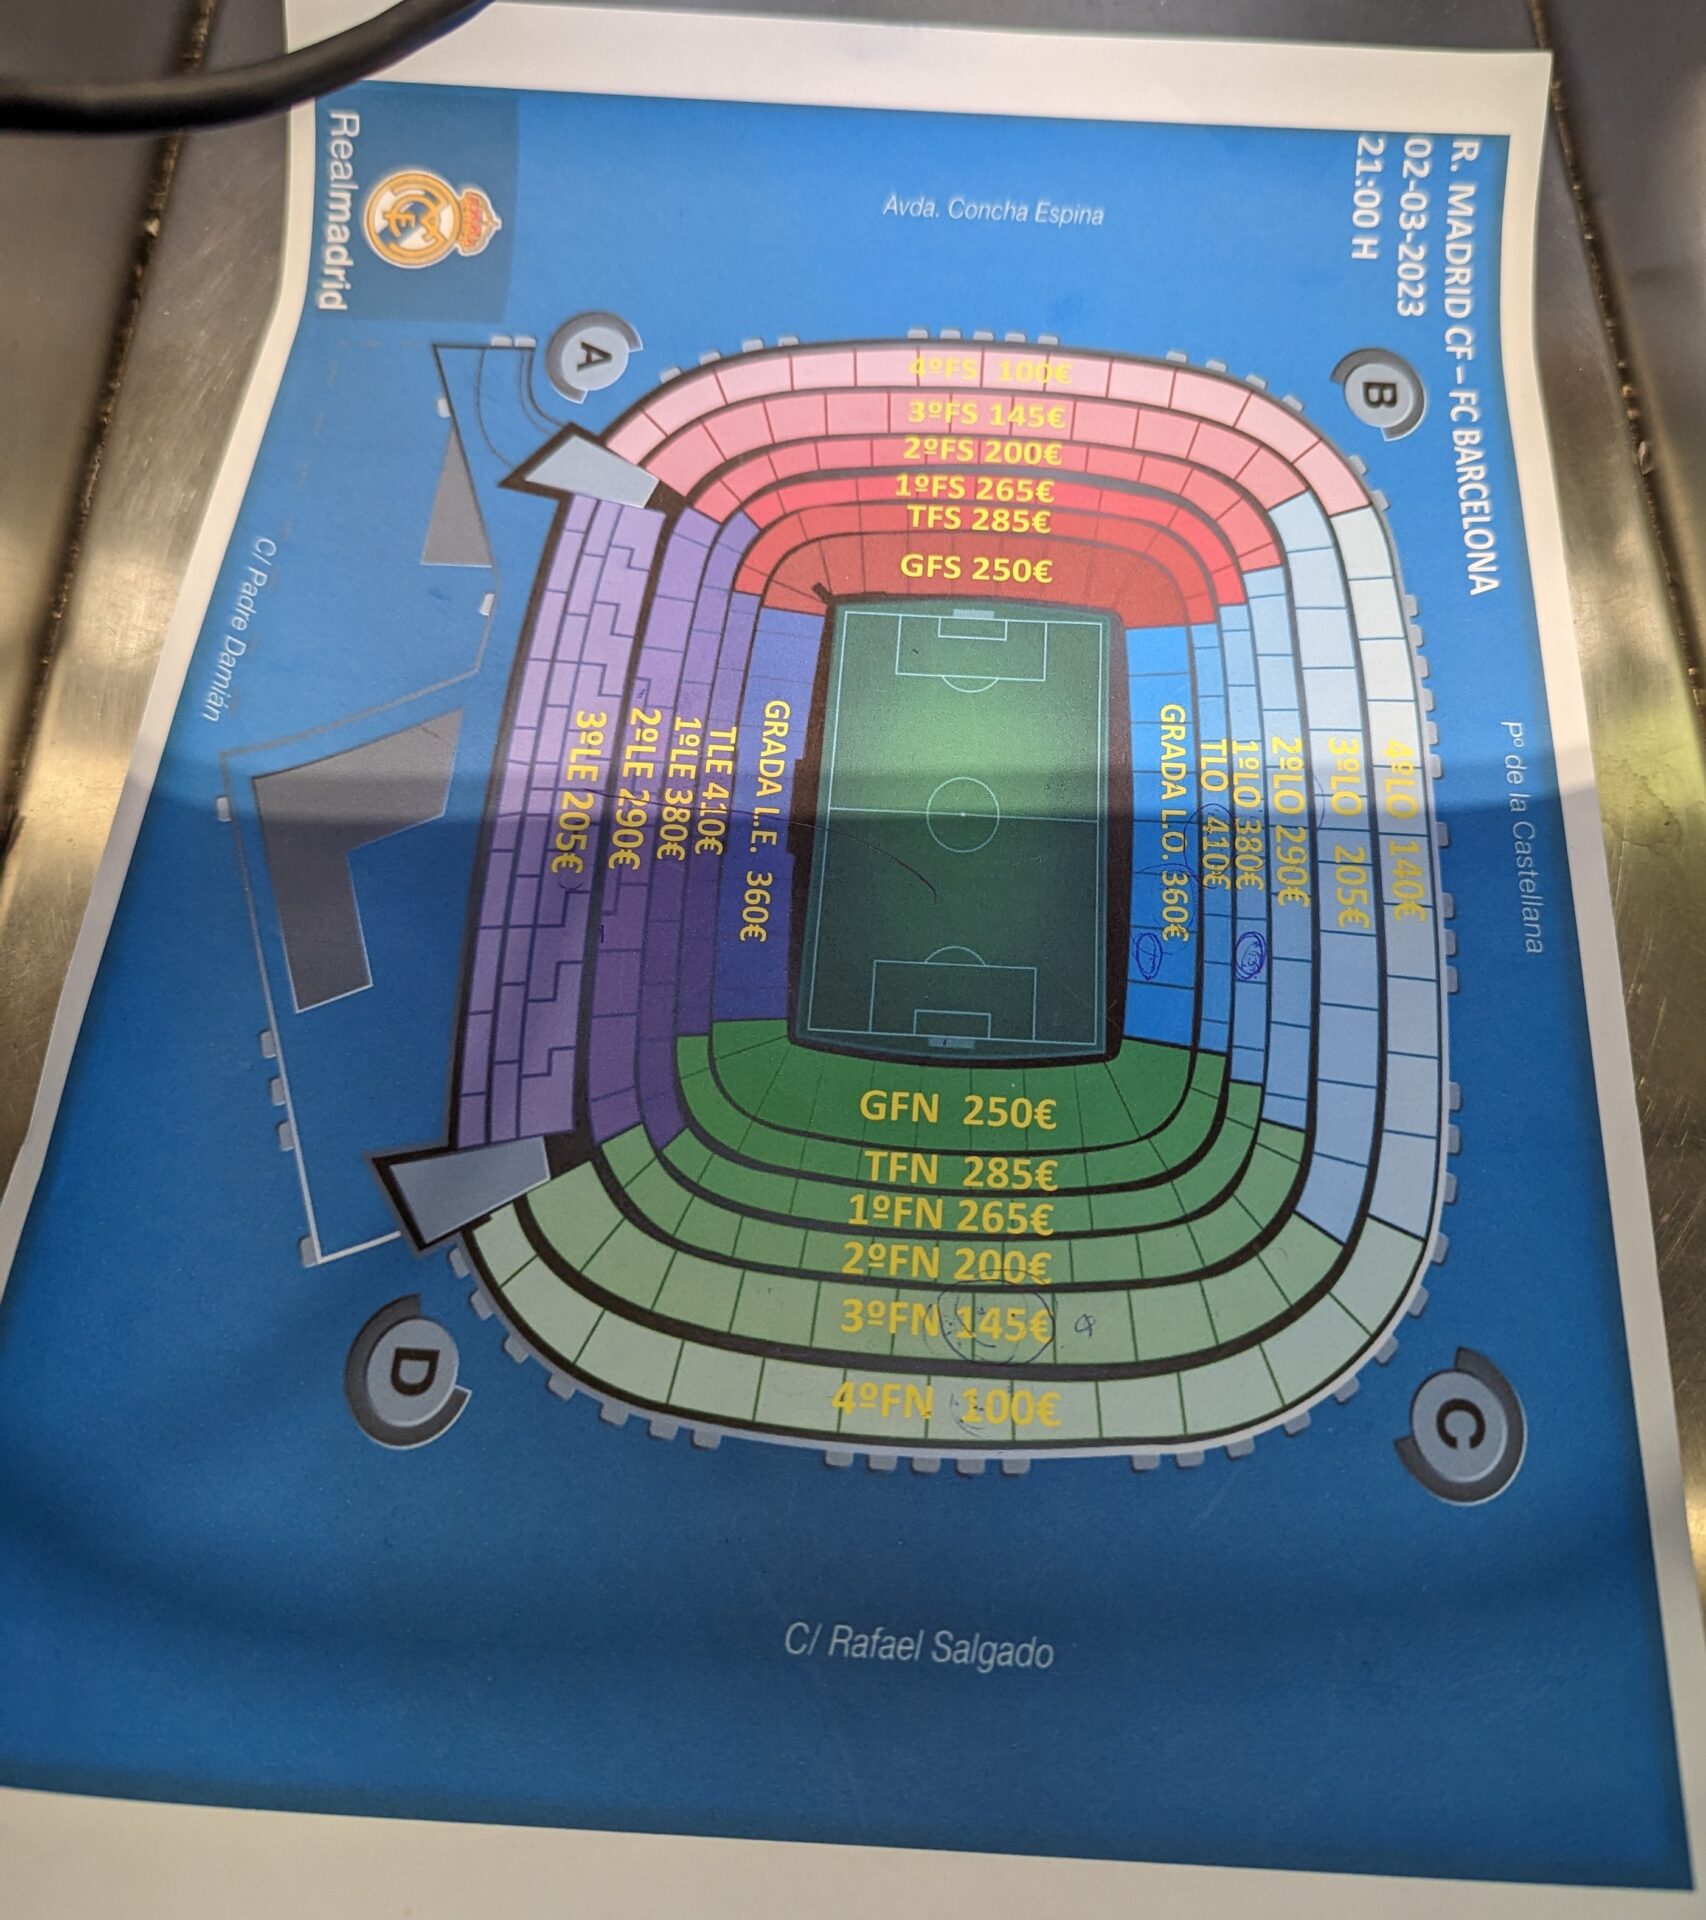 a blue paper with a stadium map